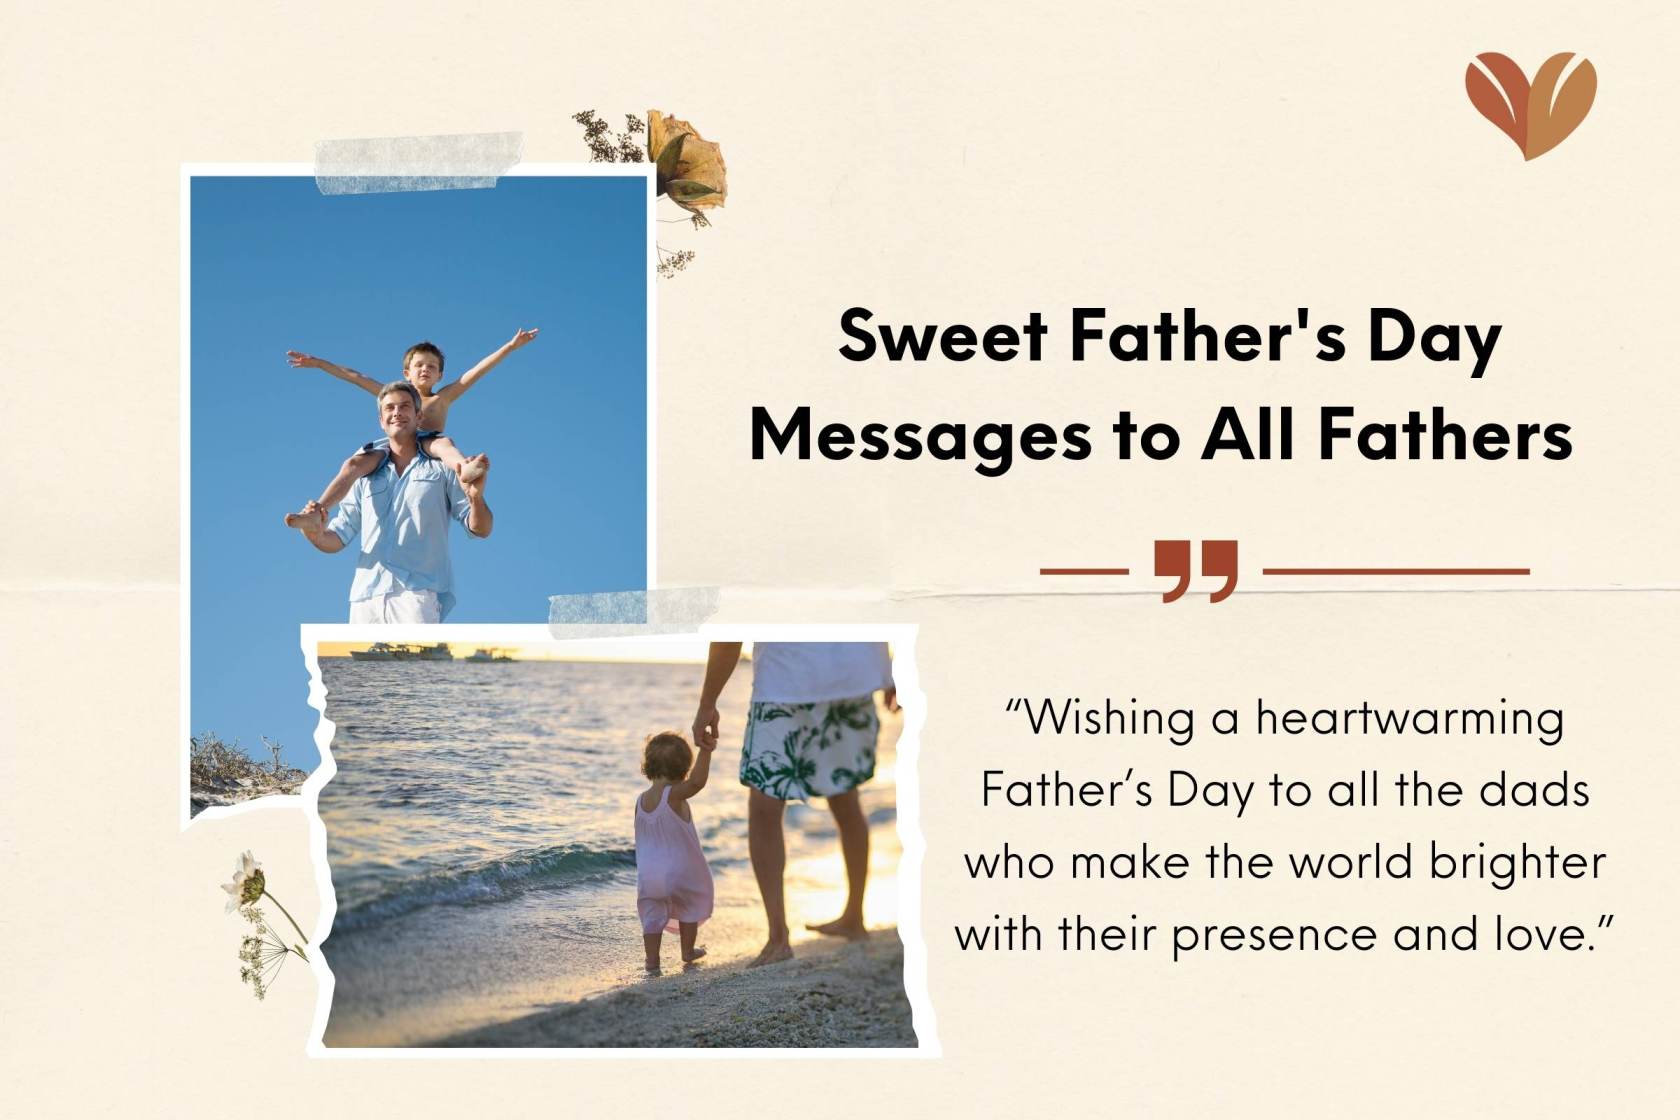 Sweet Father's Day Messages to All Fathers